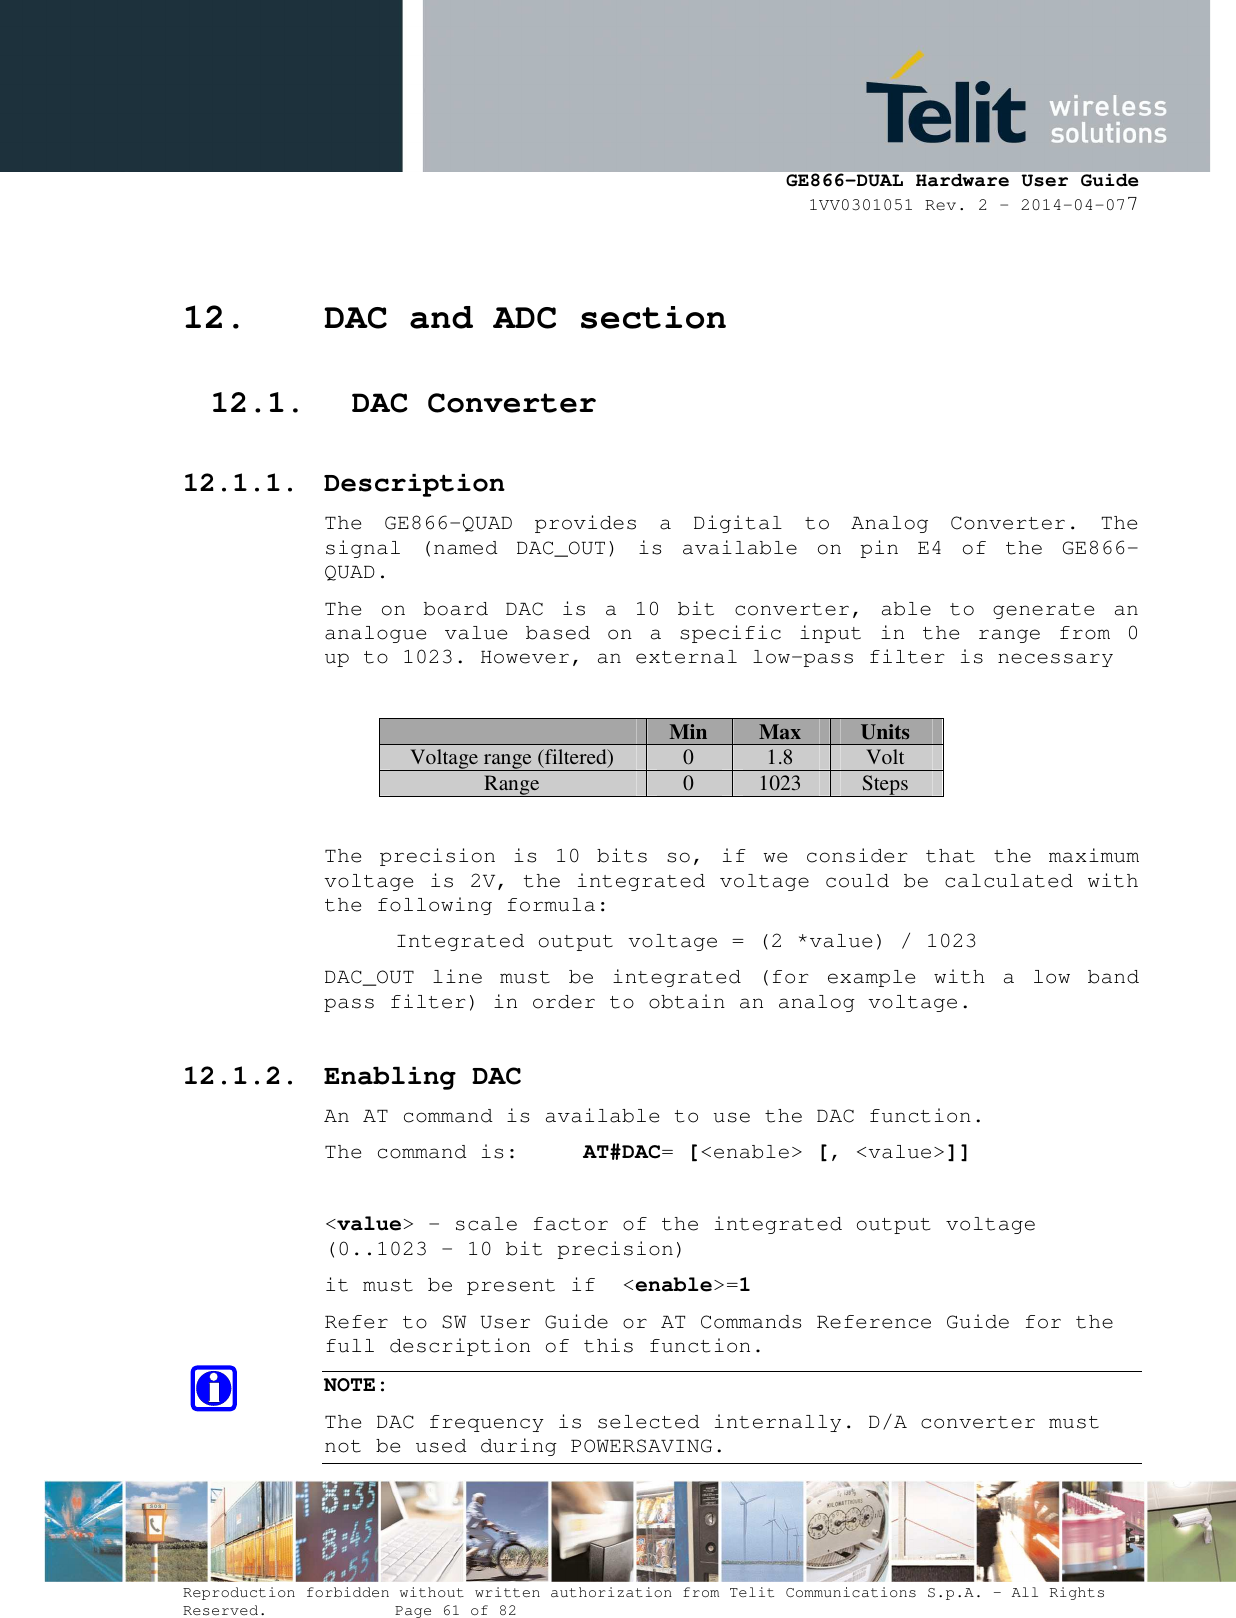      GE866-DUAL Hardware User Guide 1VV0301051 Rev. 2 – 2014-04-077  Reproduction forbidden without written authorization from Telit Communications S.p.A. - All Rights Reserved.    Page 61 of 82 Mod. 0805 2011-07 Rev.2 12. DAC and ADC section 12.1. DAC Converter 12.1.1. Description The  GE866-QUAD  provides  a  Digital  to  Analog  Converter.  The signal  (named  DAC_OUT)  is  available  on  pin  E4  of  the  GE866-QUAD. The  on  board  DAC  is  a  10  bit  converter,  able  to  generate  an analogue  value  based  on  a  specific  input  in  the  range  from  0 up to 1023. However, an external low-pass filter is necessary   Min  Max  Units Voltage range (filtered) 0 1.8 Volt Range  0  1023  Steps  The  precision  is  10  bits  so,  if  we  consider  that  the  maximum voltage is 2V, the integrated voltage could be calculated with the following formula:   Integrated output voltage = (2 *value) / 1023 DAC_OUT  line  must  be  integrated  (for  example  with  a  low  band pass filter) in order to obtain an analog voltage. 12.1.2. Enabling DAC An AT command is available to use the DAC function. The command is:     AT#DAC= [&lt;enable&gt; [, &lt;value&gt;]]  &lt;value&gt; - scale factor of the integrated output voltage (0..1023 - 10 bit precision) it must be present if  &lt;enable&gt;=1 Refer to SW User Guide or AT Commands Reference Guide for the full description of this function. NOTE: The DAC frequency is selected internally. D/A converter must not be used during POWERSAVING. 